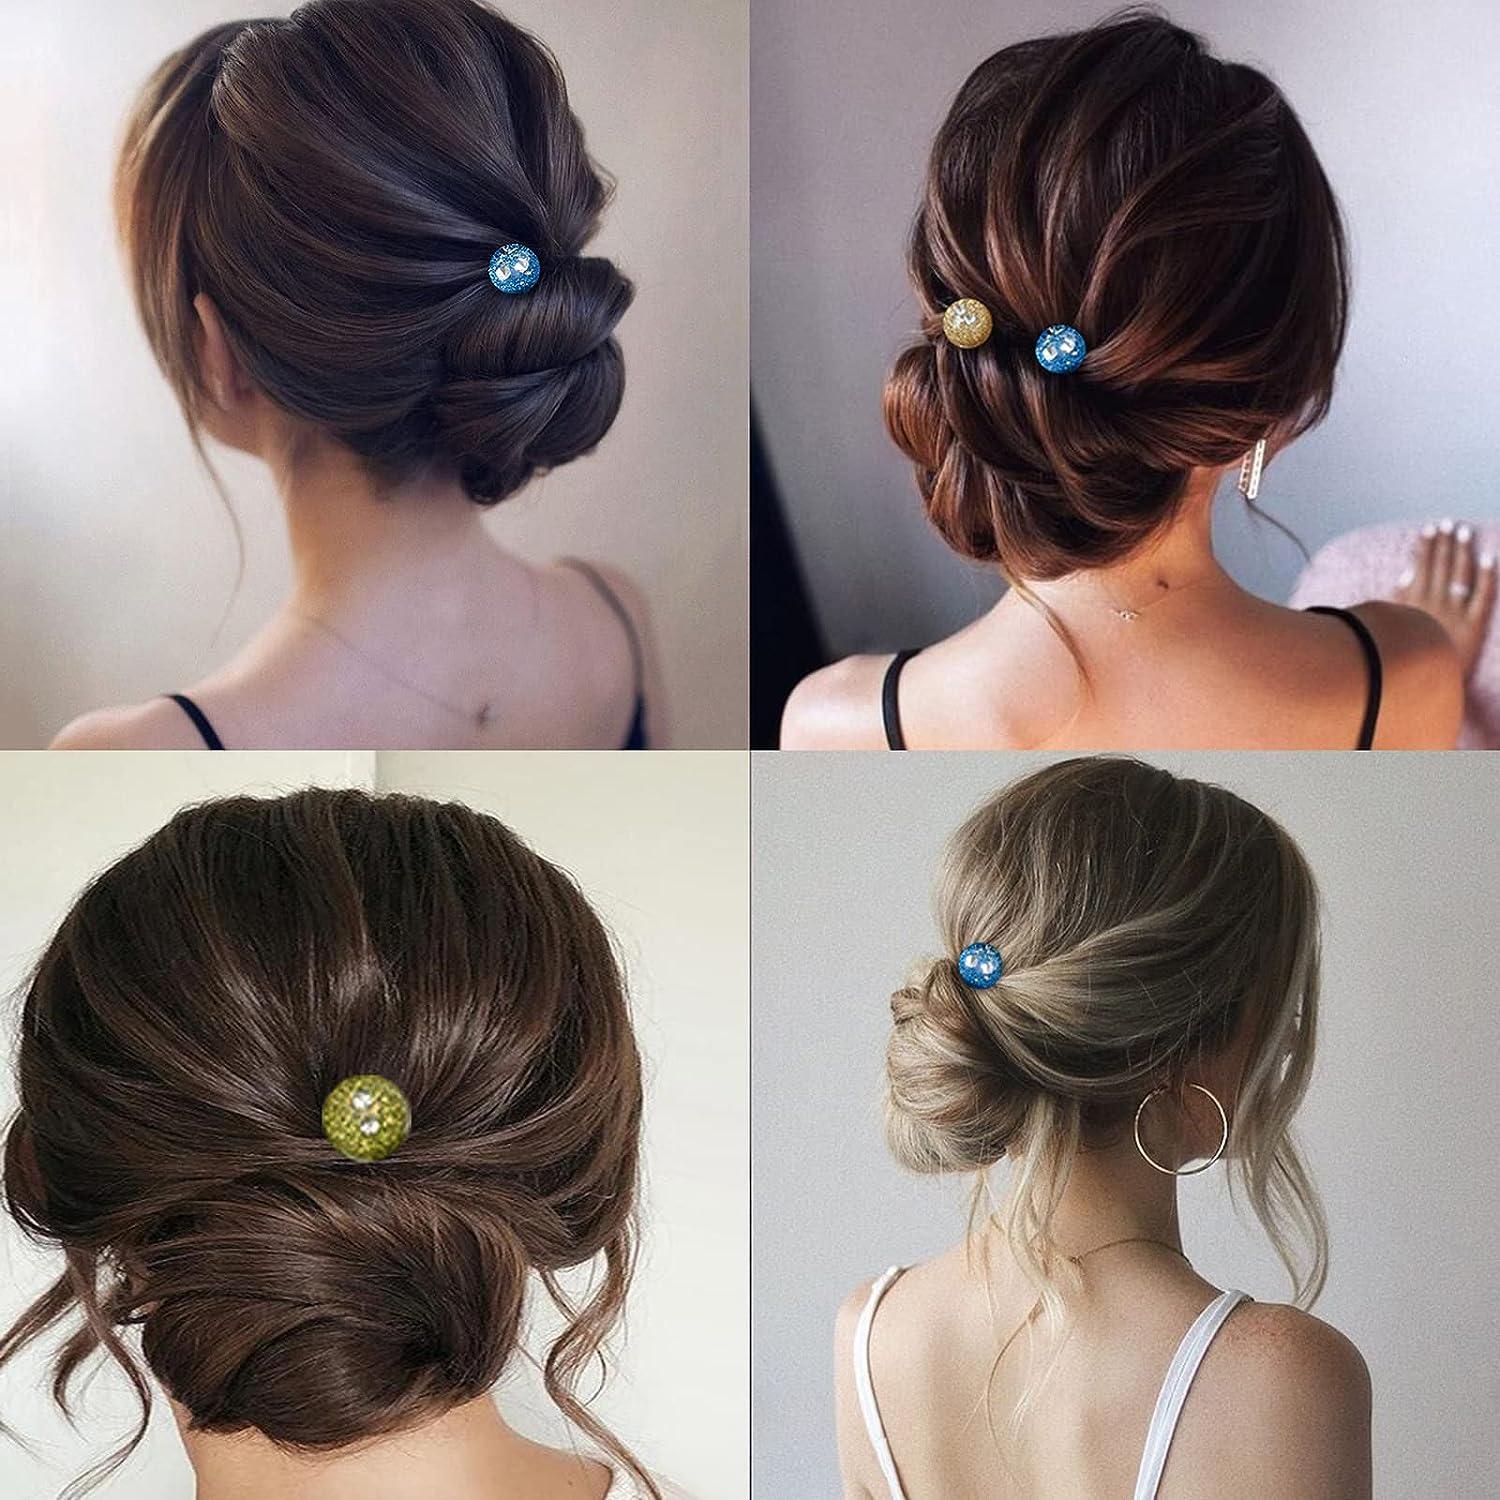 How to DIY Easy Bun Hairstyle Using Chopstick